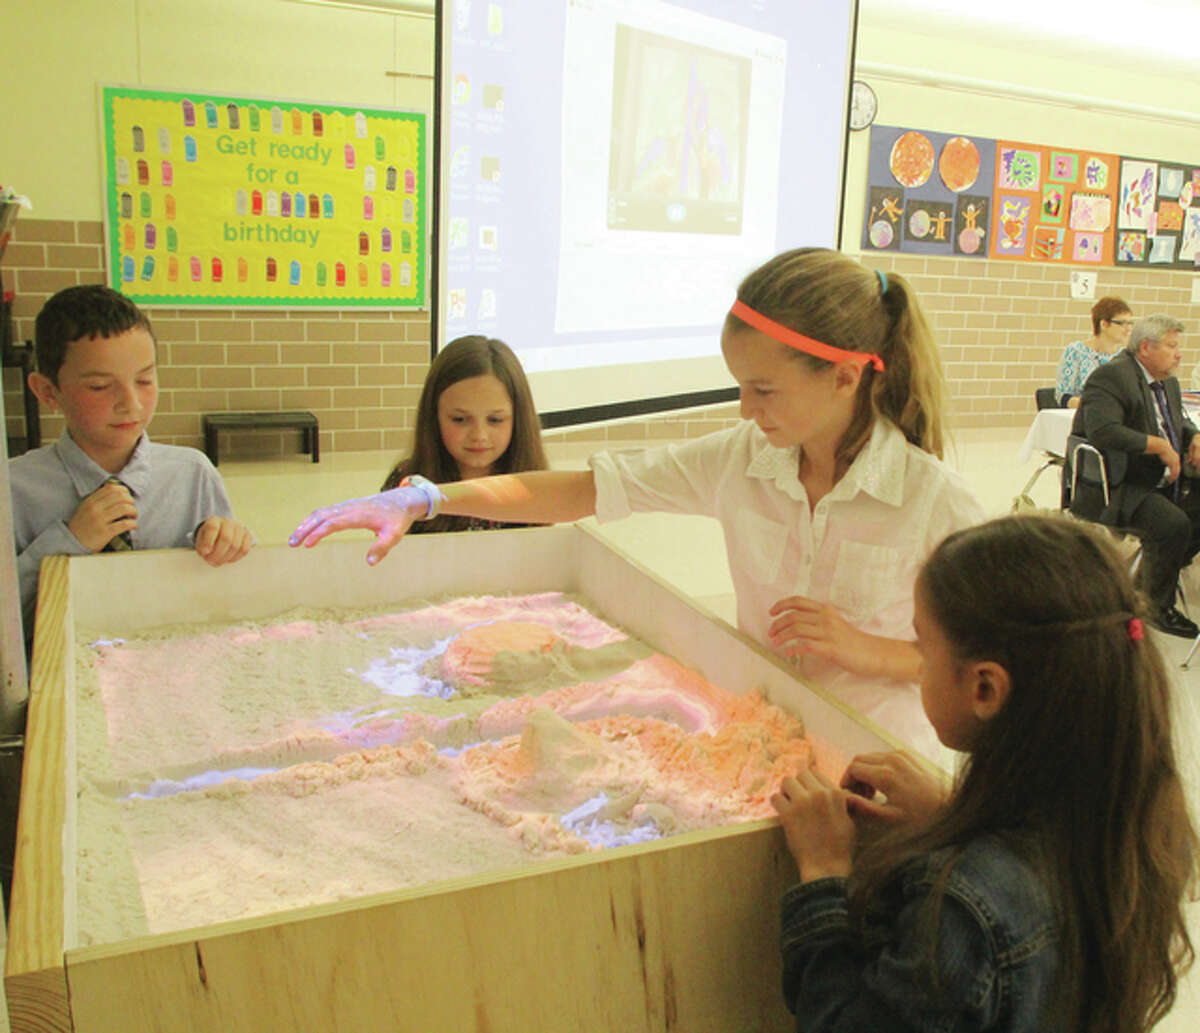 Students demonstrate the “Augmented Reality Sandbox” at Monday’s Edwardsville school board meeting. The sandbox uses technology to allow students to learn about social studies and science.